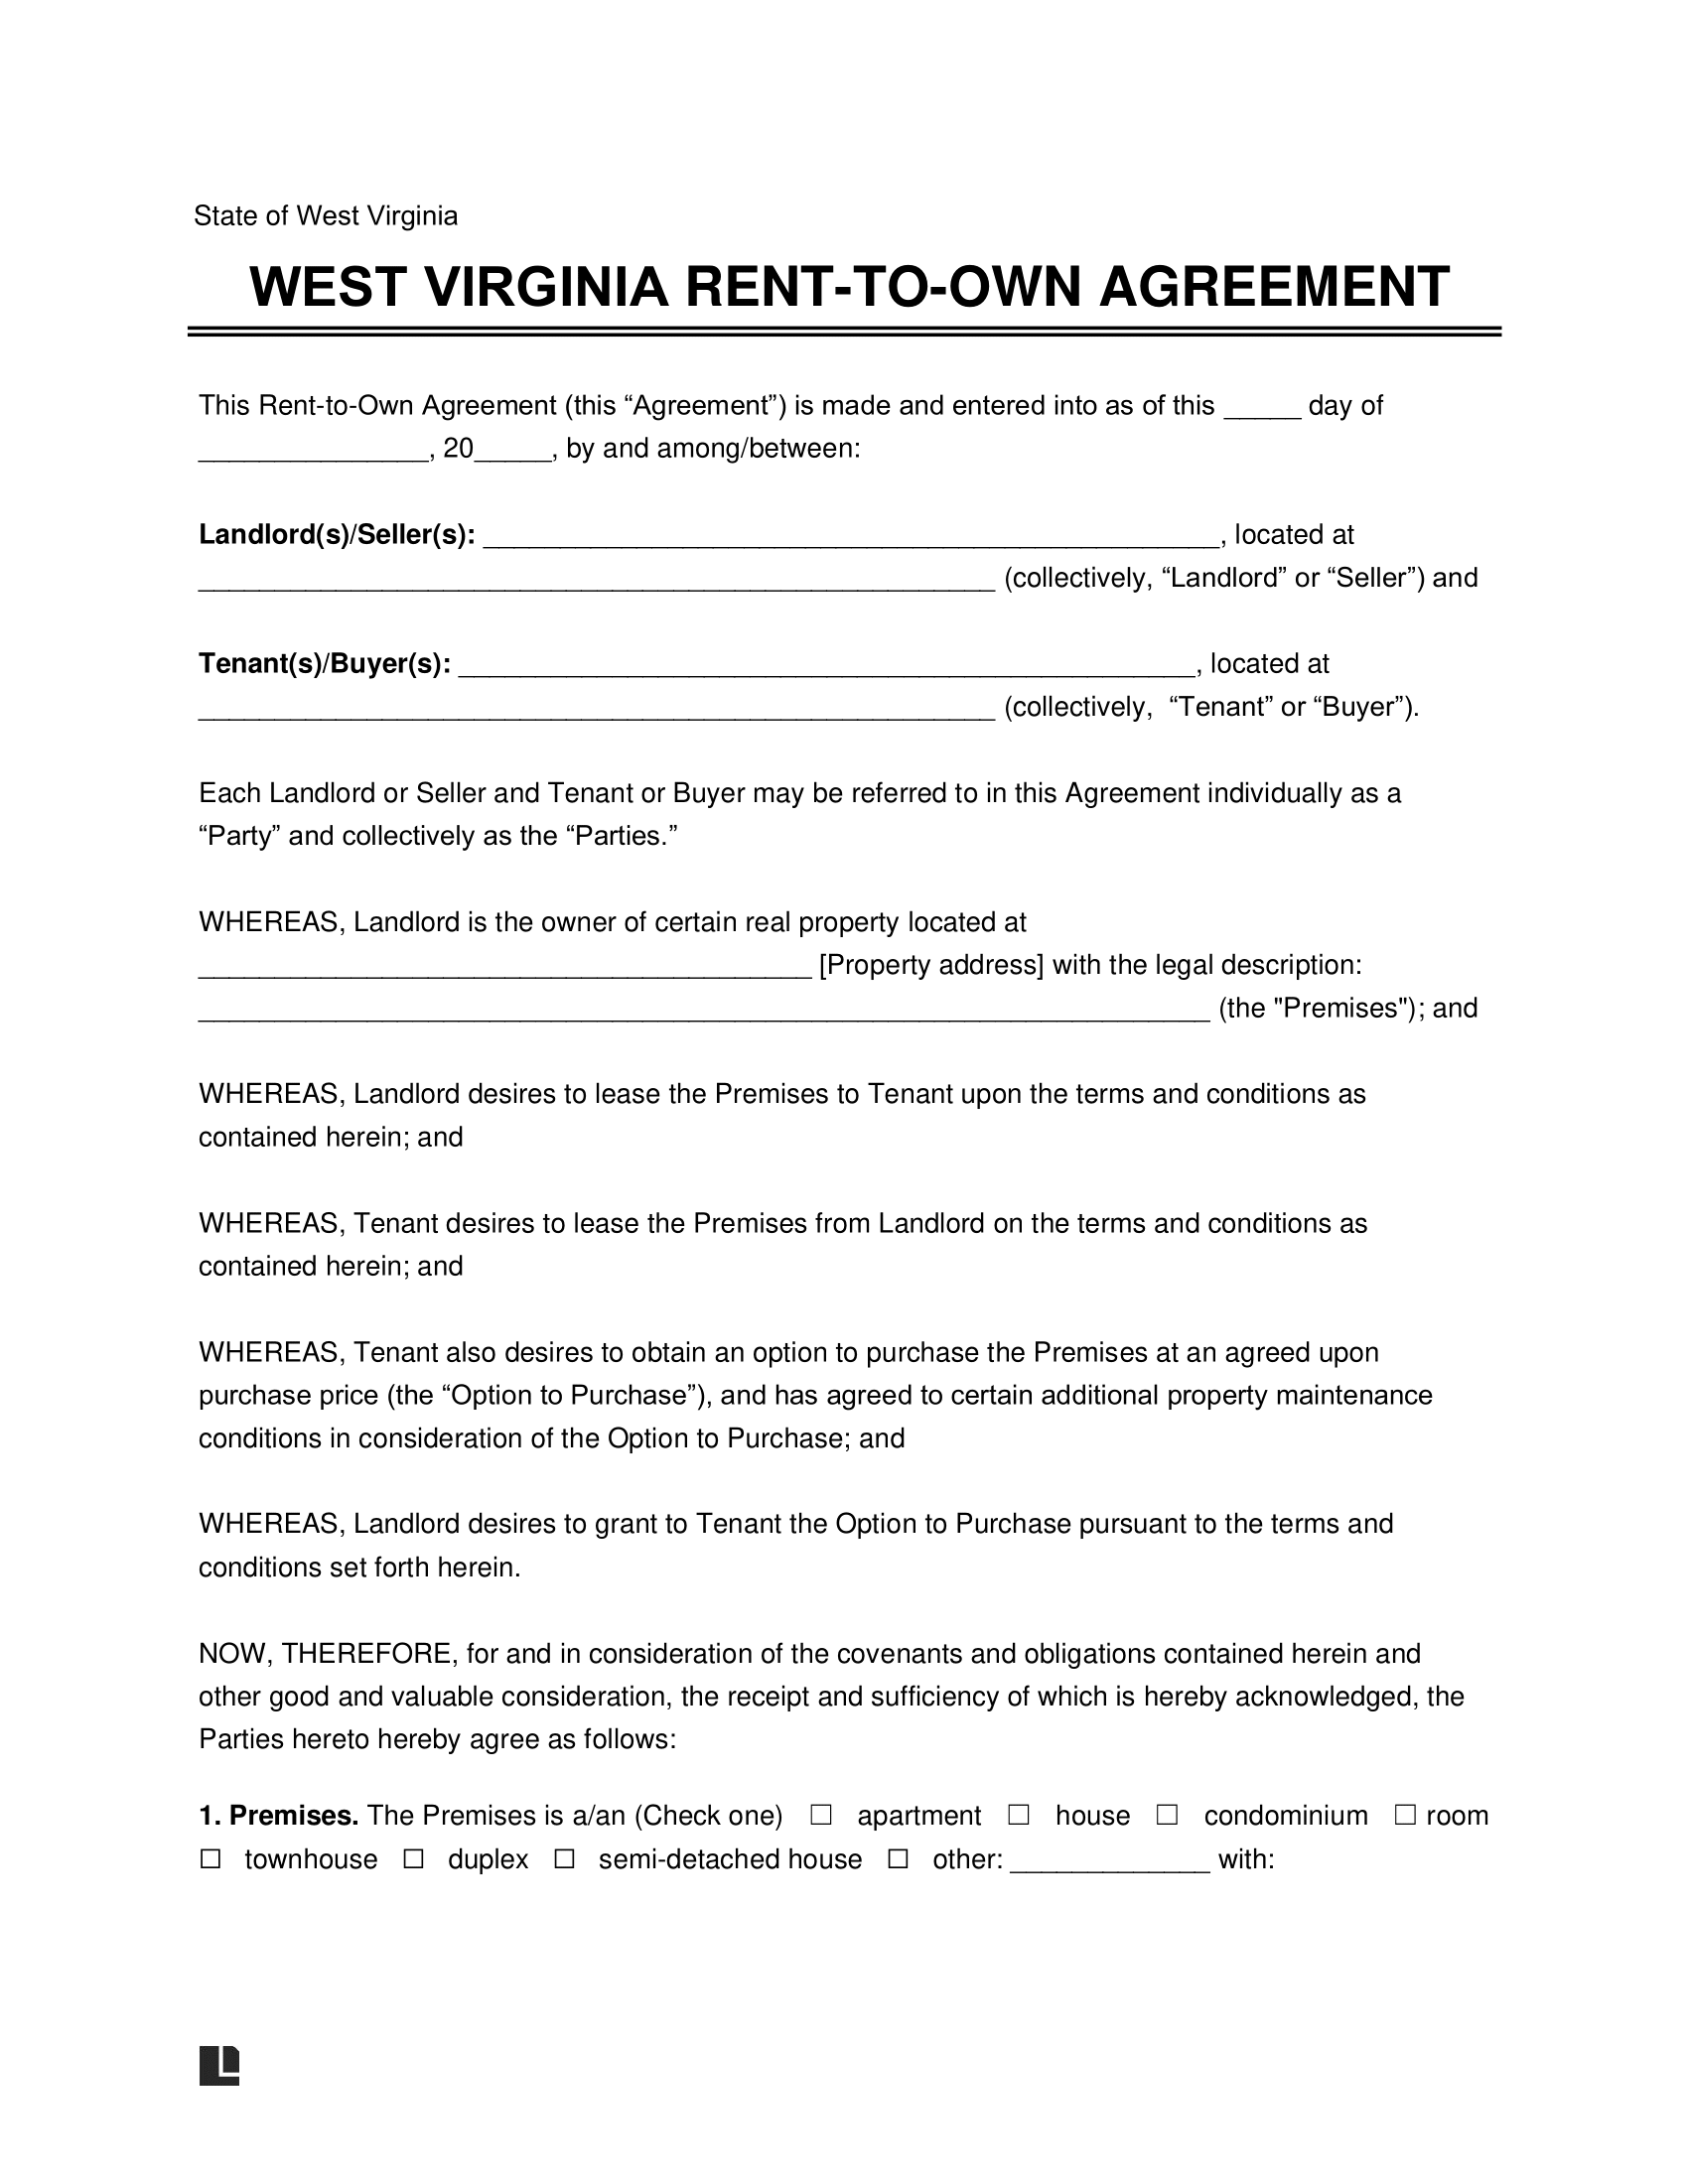 West Virginia Rent-to-Own Lease Agreement